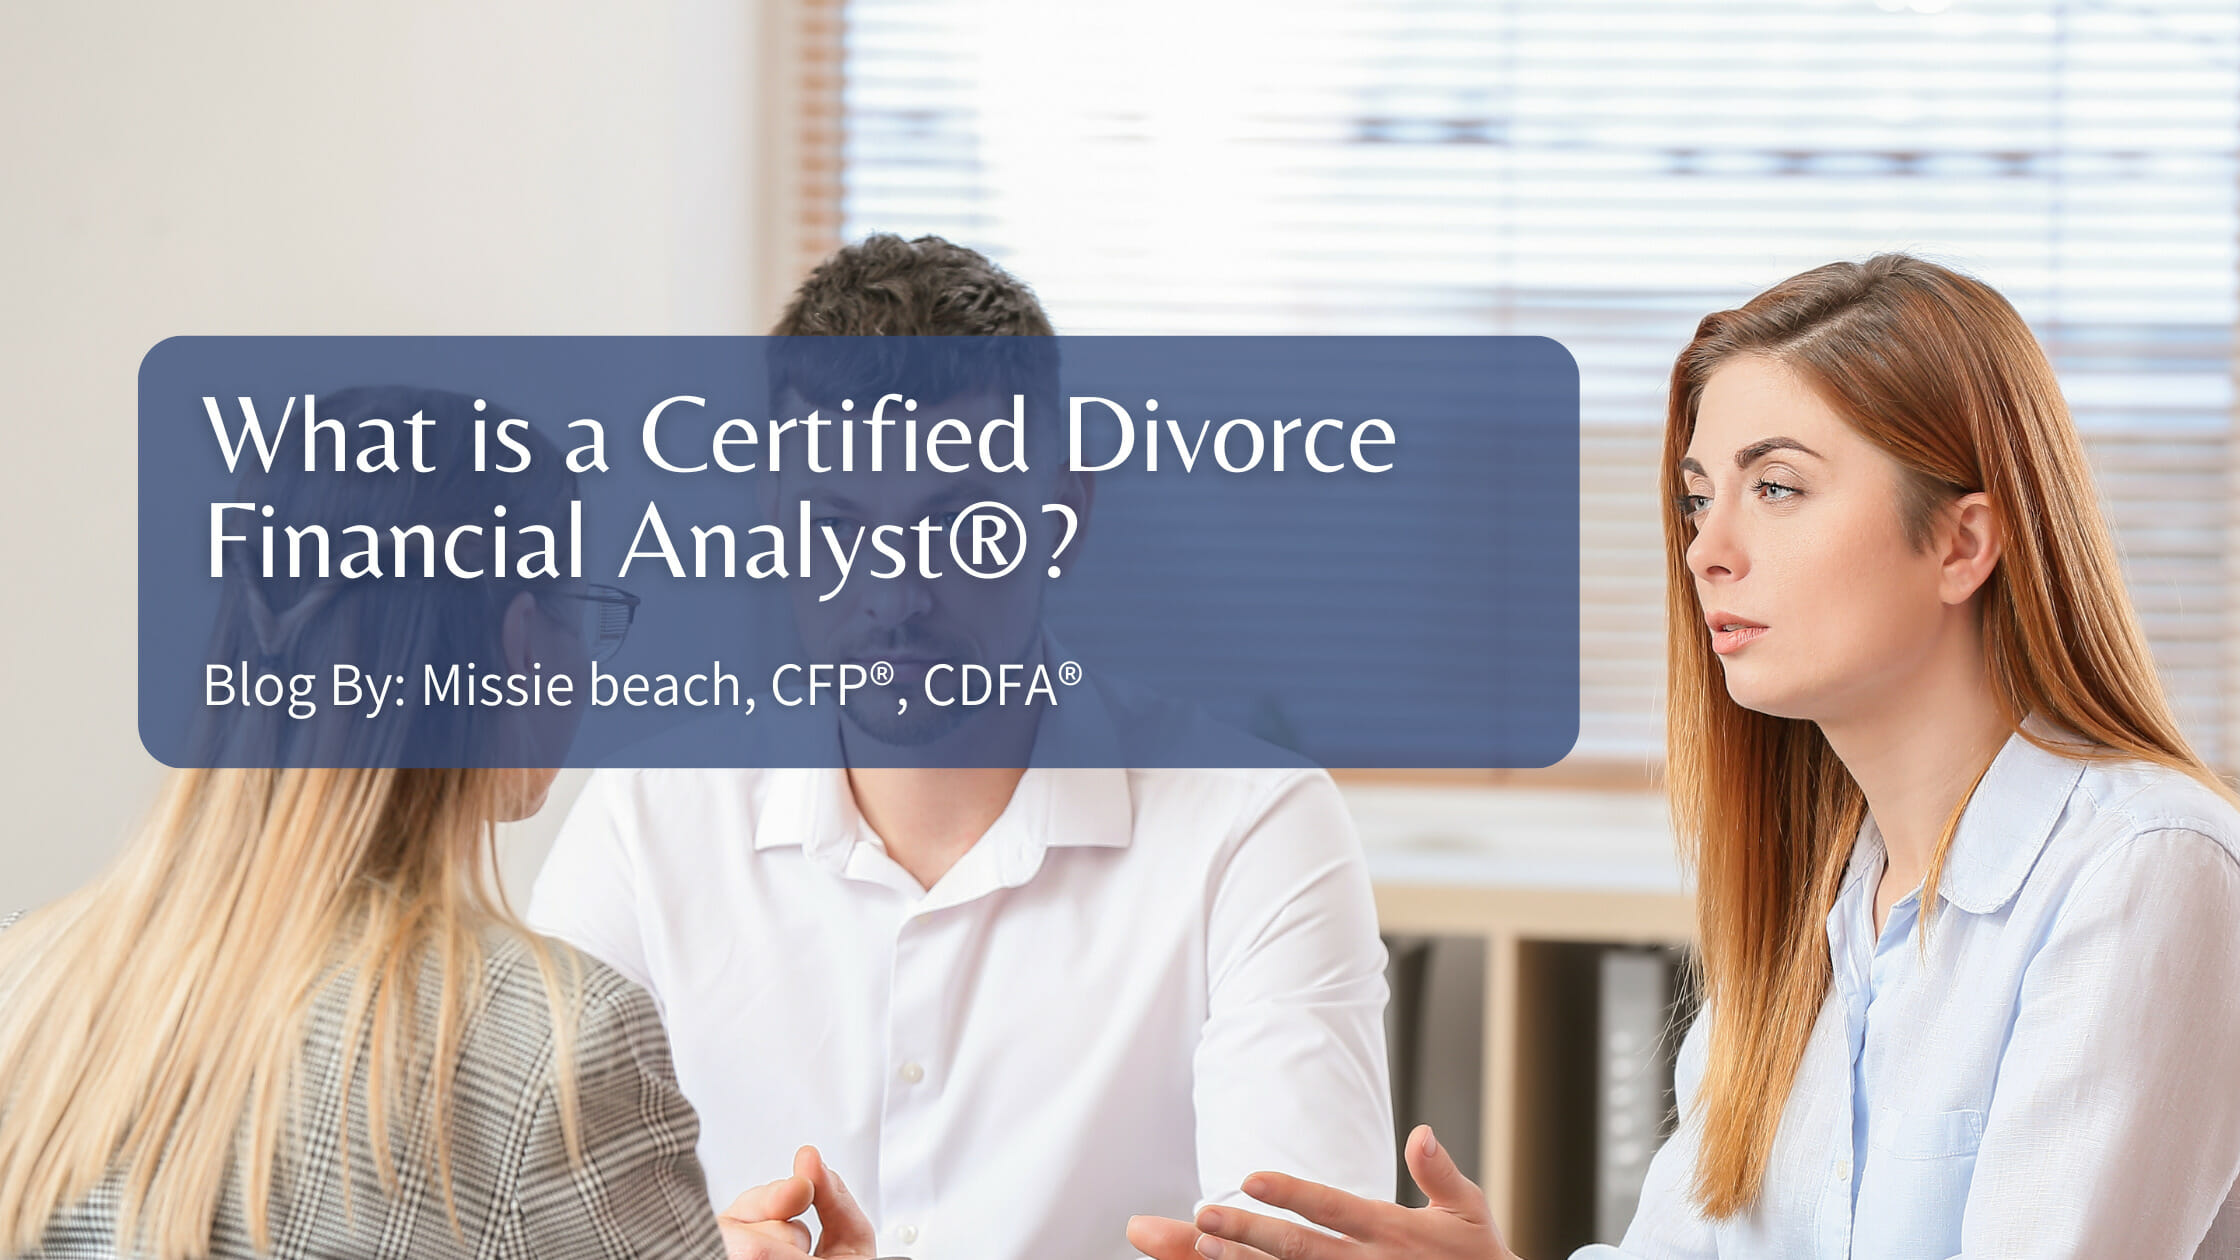 What is a Certified Divorce Financial Analyst®?